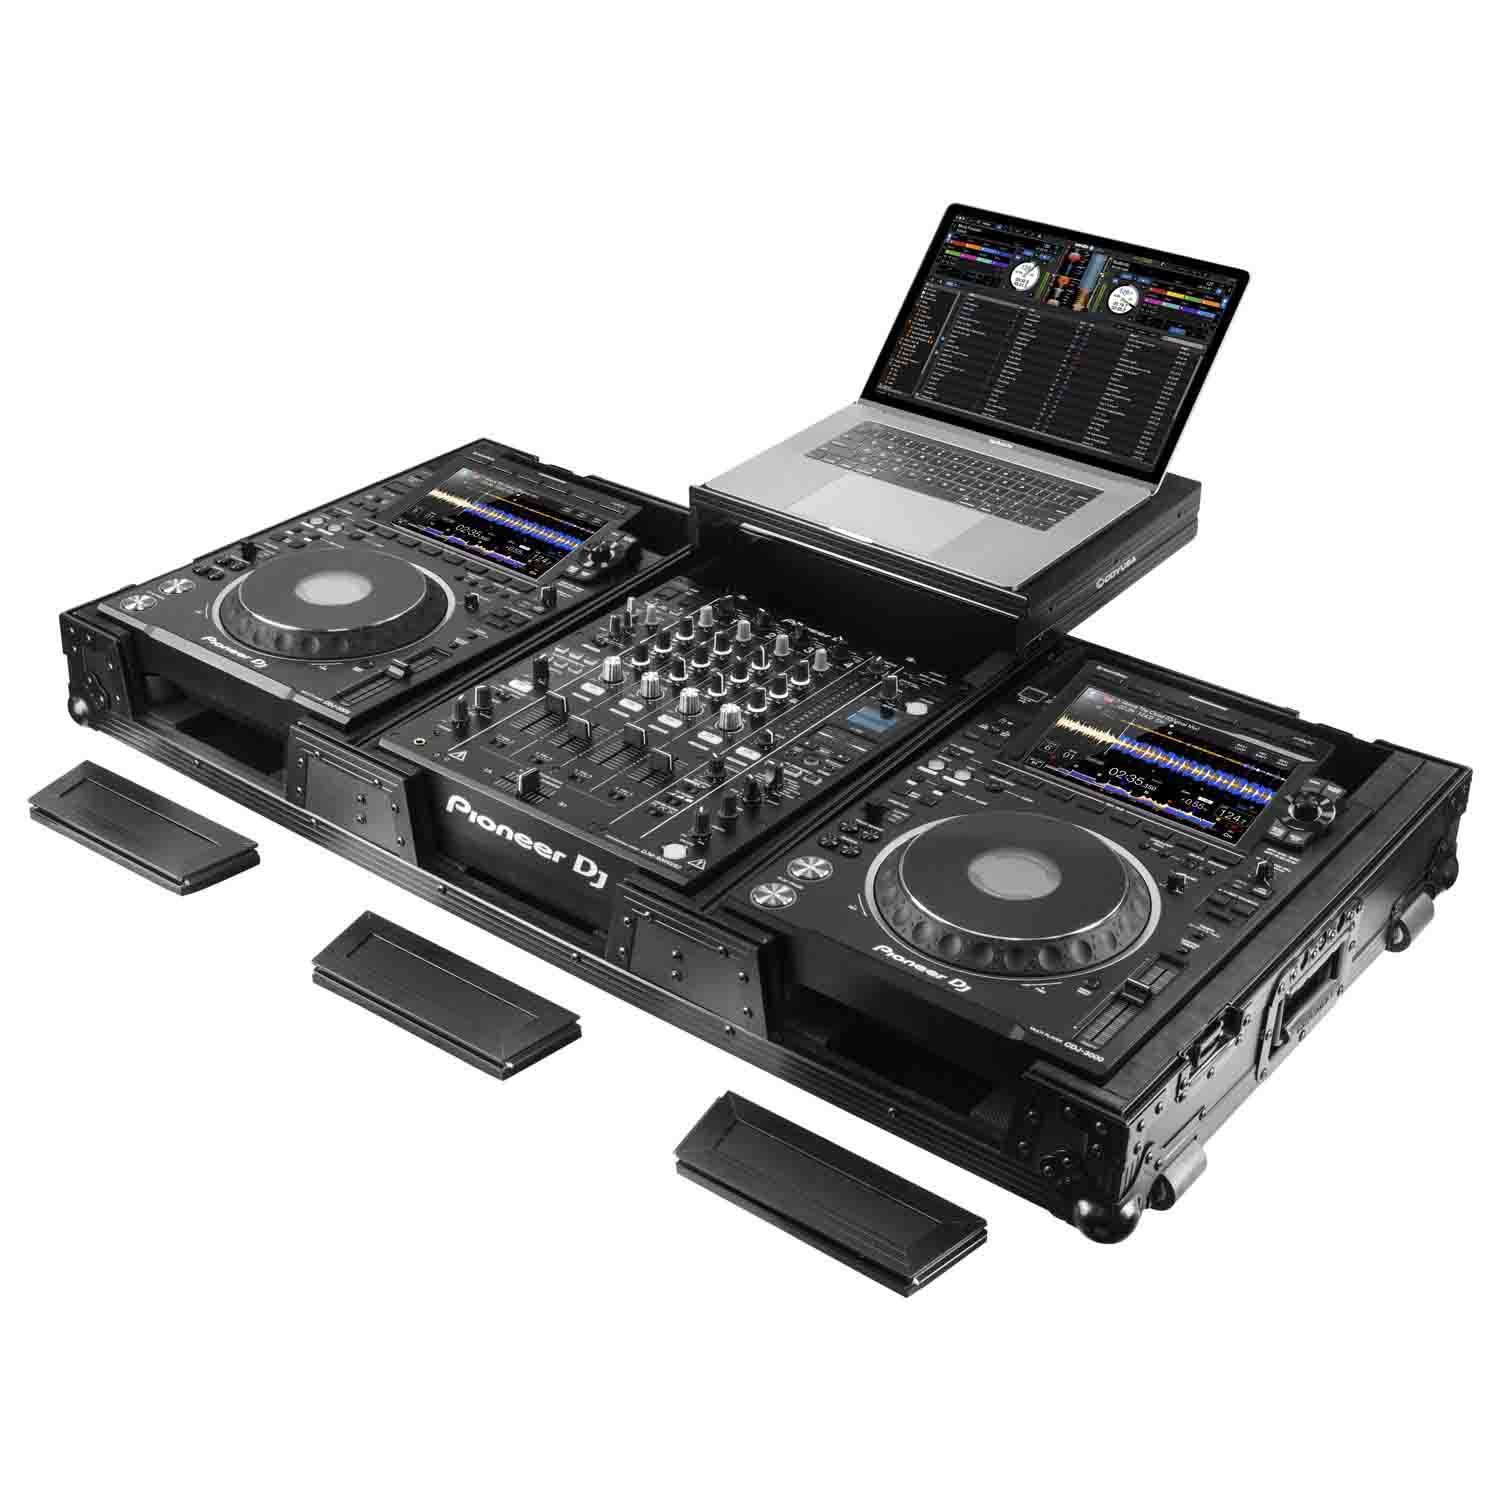 B-Stock Scratch & Dent: Odyssey FZGS12CDJWXD2BL Extra Deep DJ Coffin Case for 12″ Format DJ Mixer and Two Media Players with Glide Platform - Black - Hollywood DJ